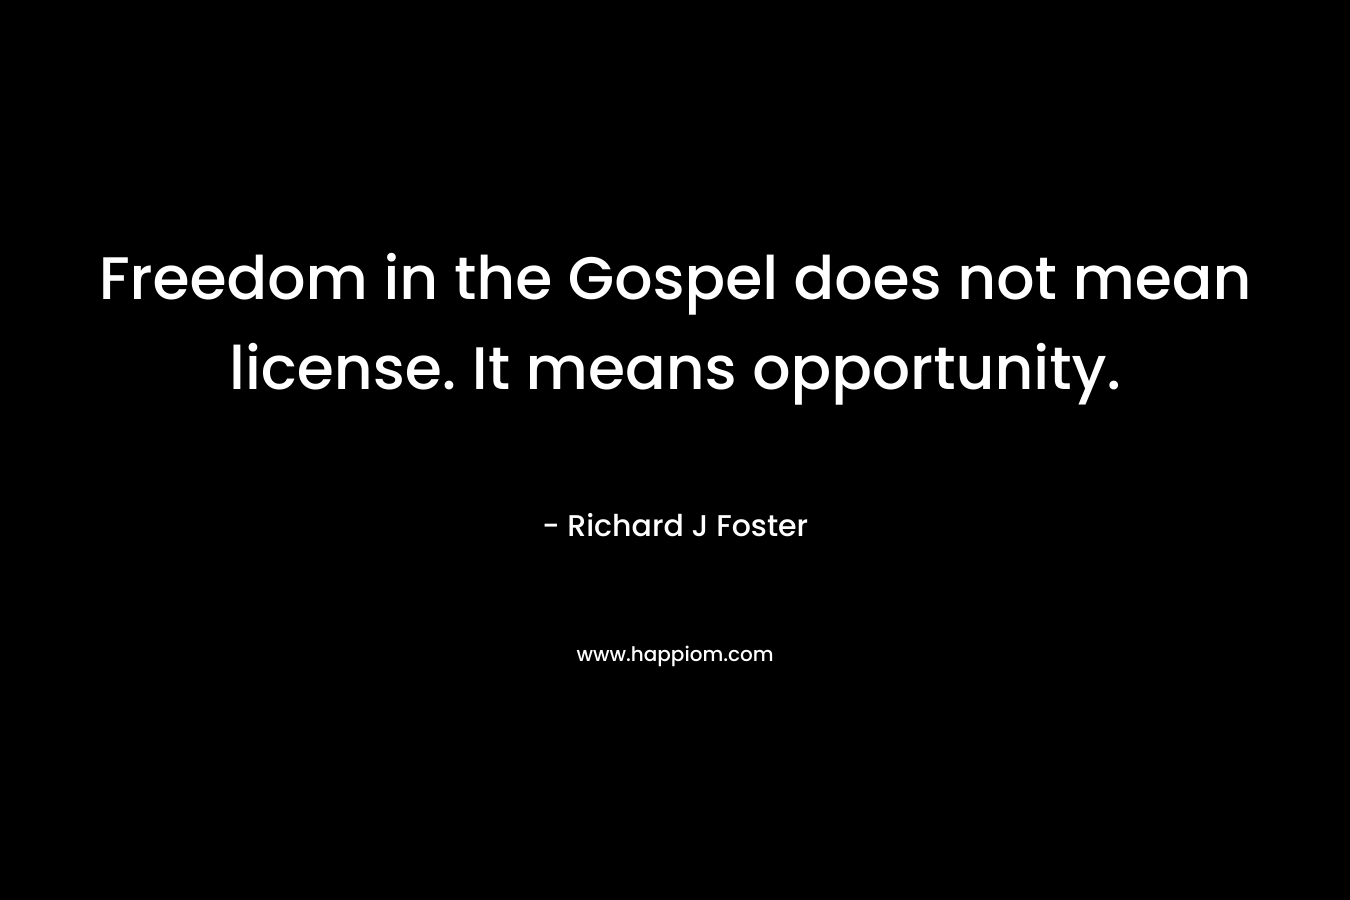 Freedom in the Gospel does not mean license. It means opportunity. – Richard J Foster